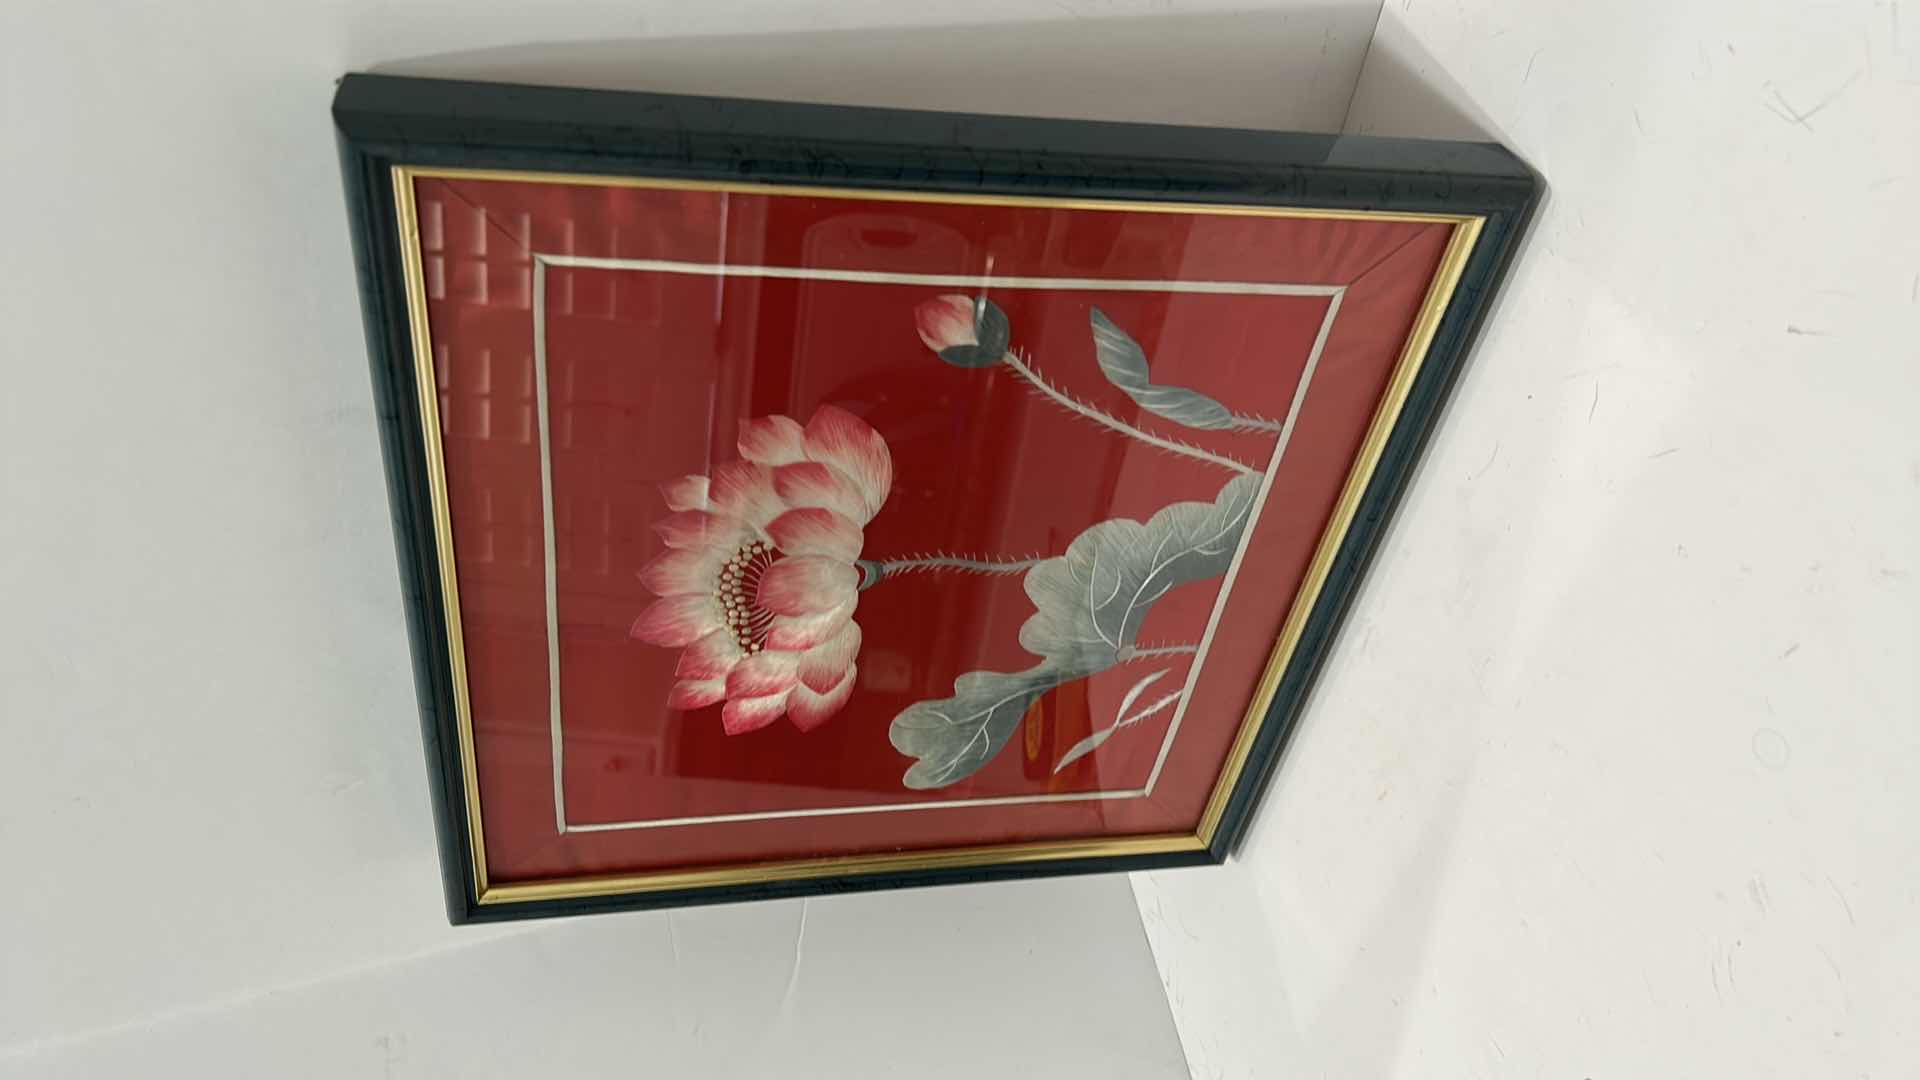 Photo 4 of ANTIQUE CHINESE TEXTILE FABRIC, SILK WITH SILK THREAD HAND EMBROIDERY ARTWORK FRAMED 13 1/2” x 13 1/2”